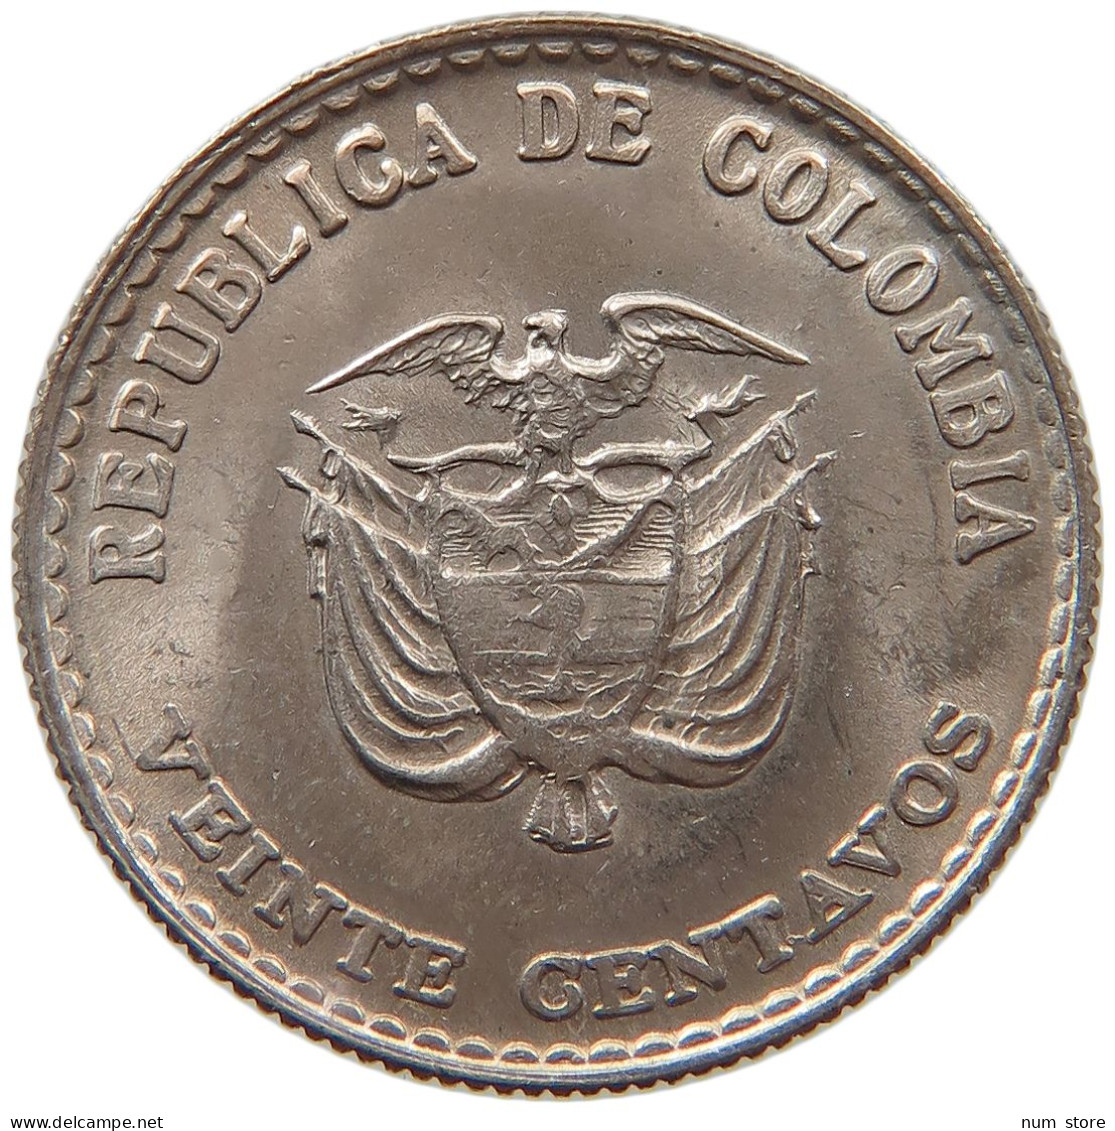 COLOMBIA 20 CENTAVOS 1965  #s030 0153 - Colombia